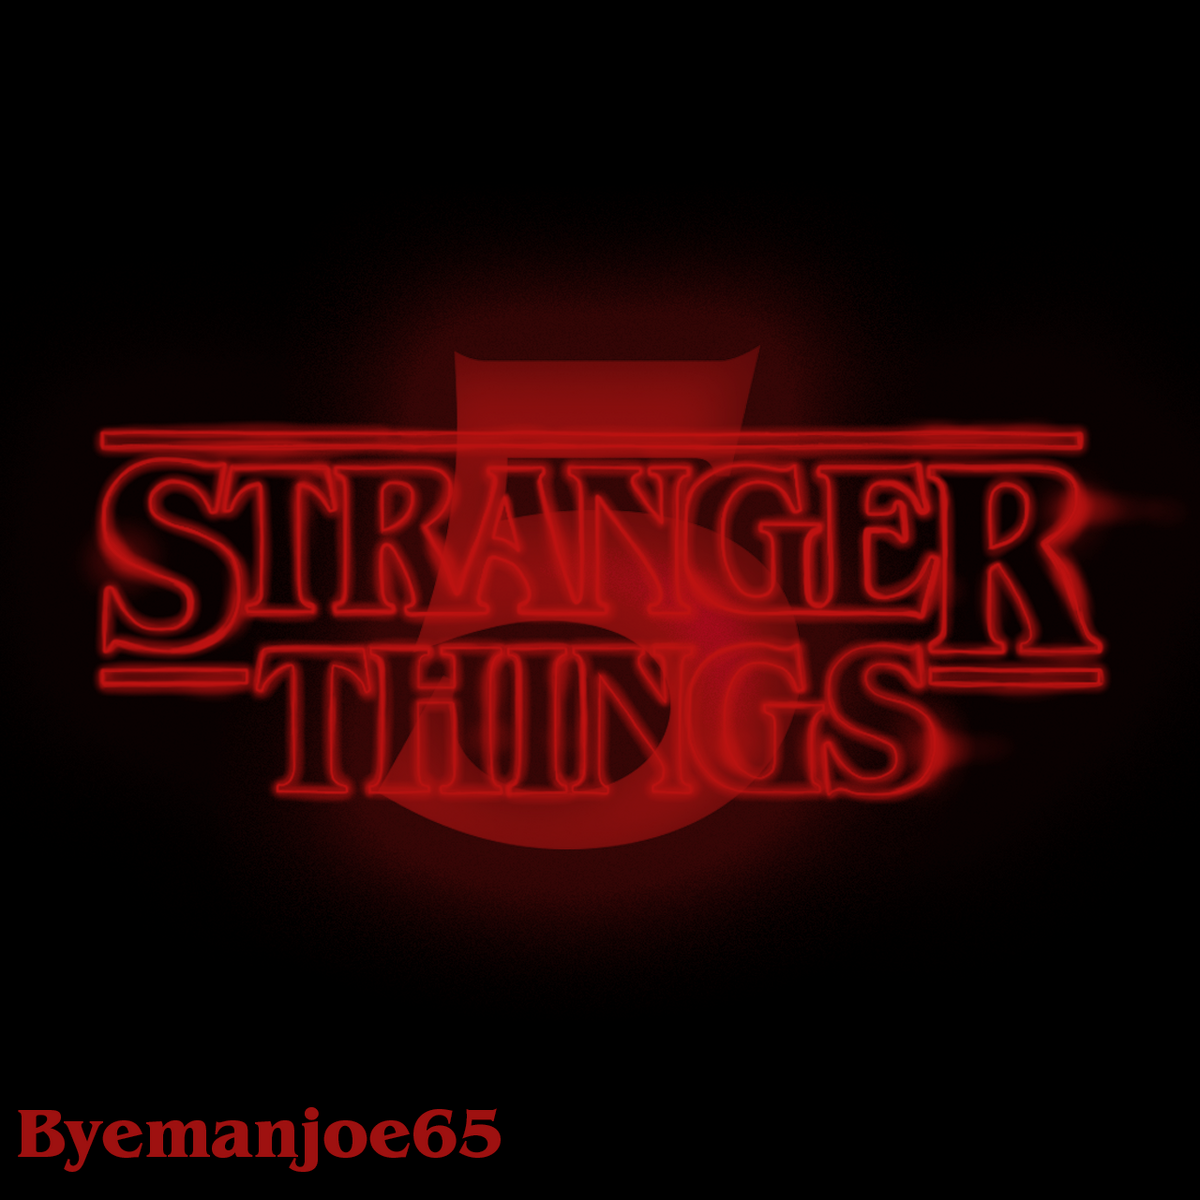 Stranger things Logo Wireless Charger Red